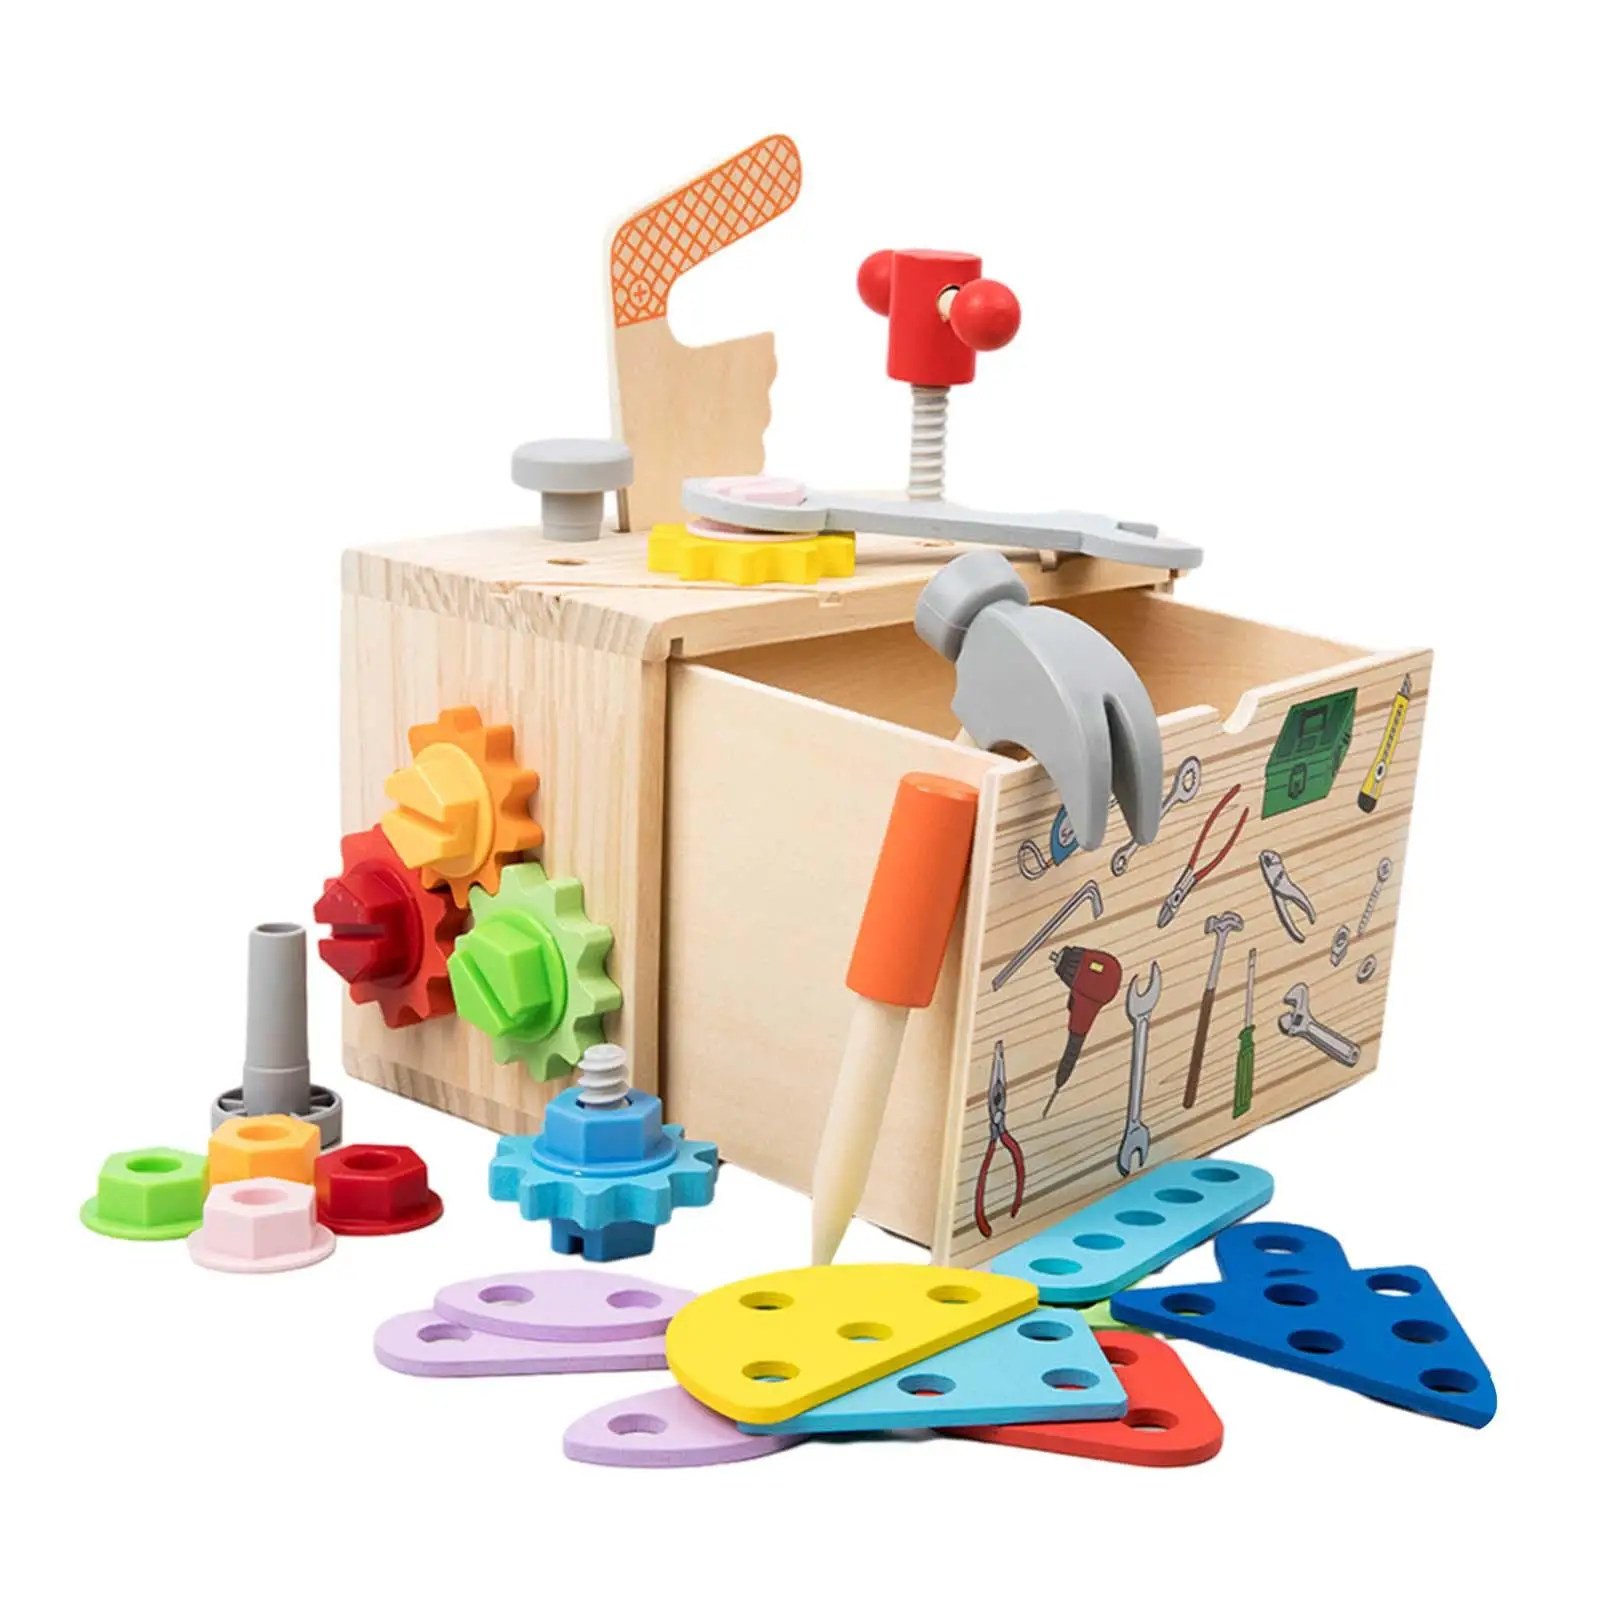 Wooden Toolbox Toy Develops Fine Motor Skills Pretend Play Construction Toy for Toddlers Girls Boys Christmas Holiday Ages 3+